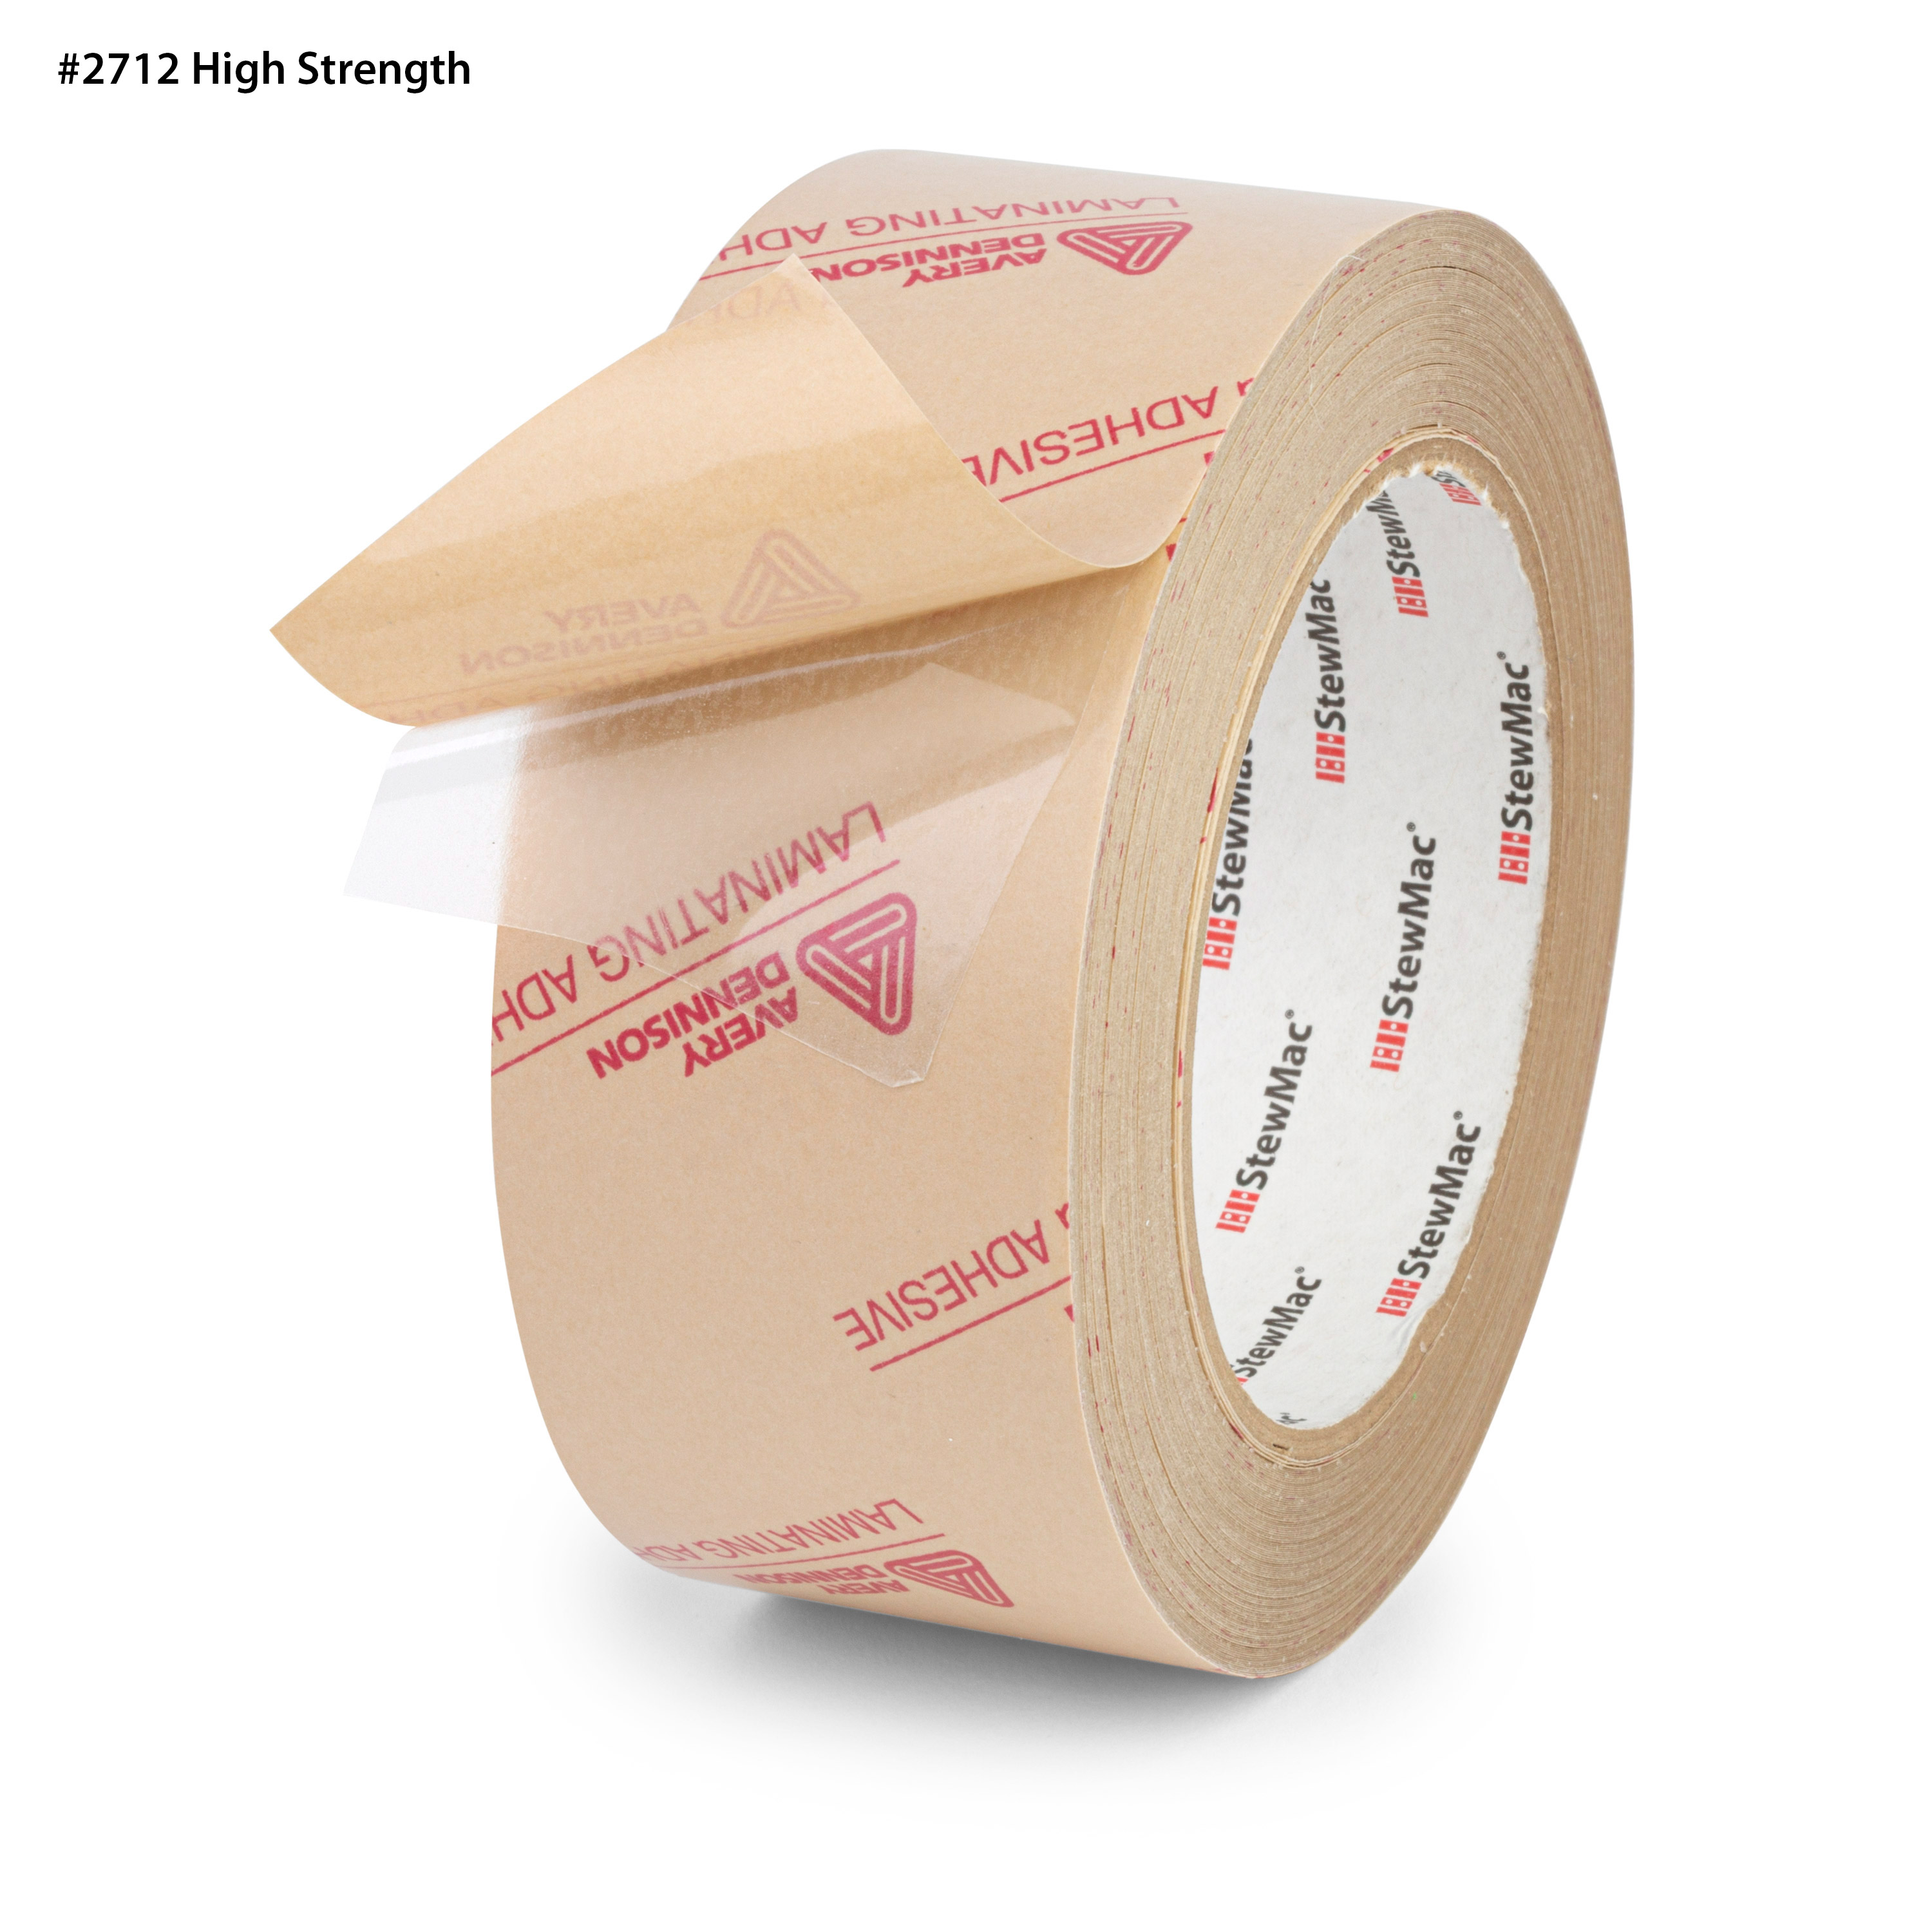 Double-Stick Tape, High Strength from StewMac. StewMac